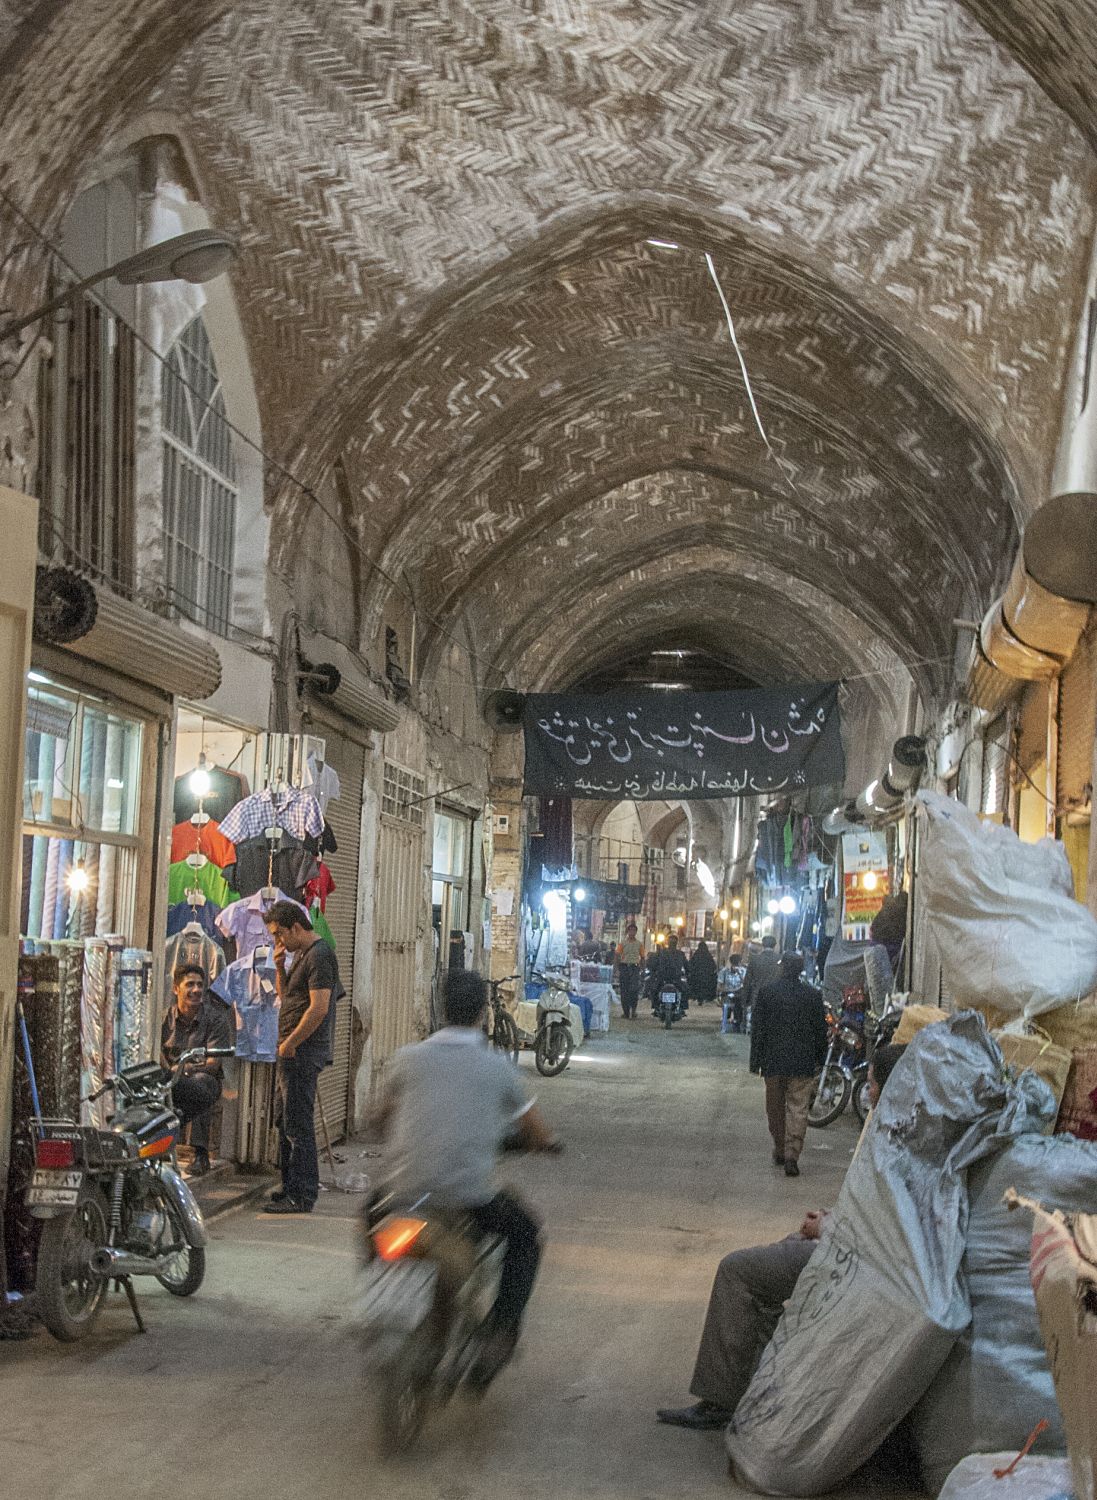 View of covered street within bazaar.